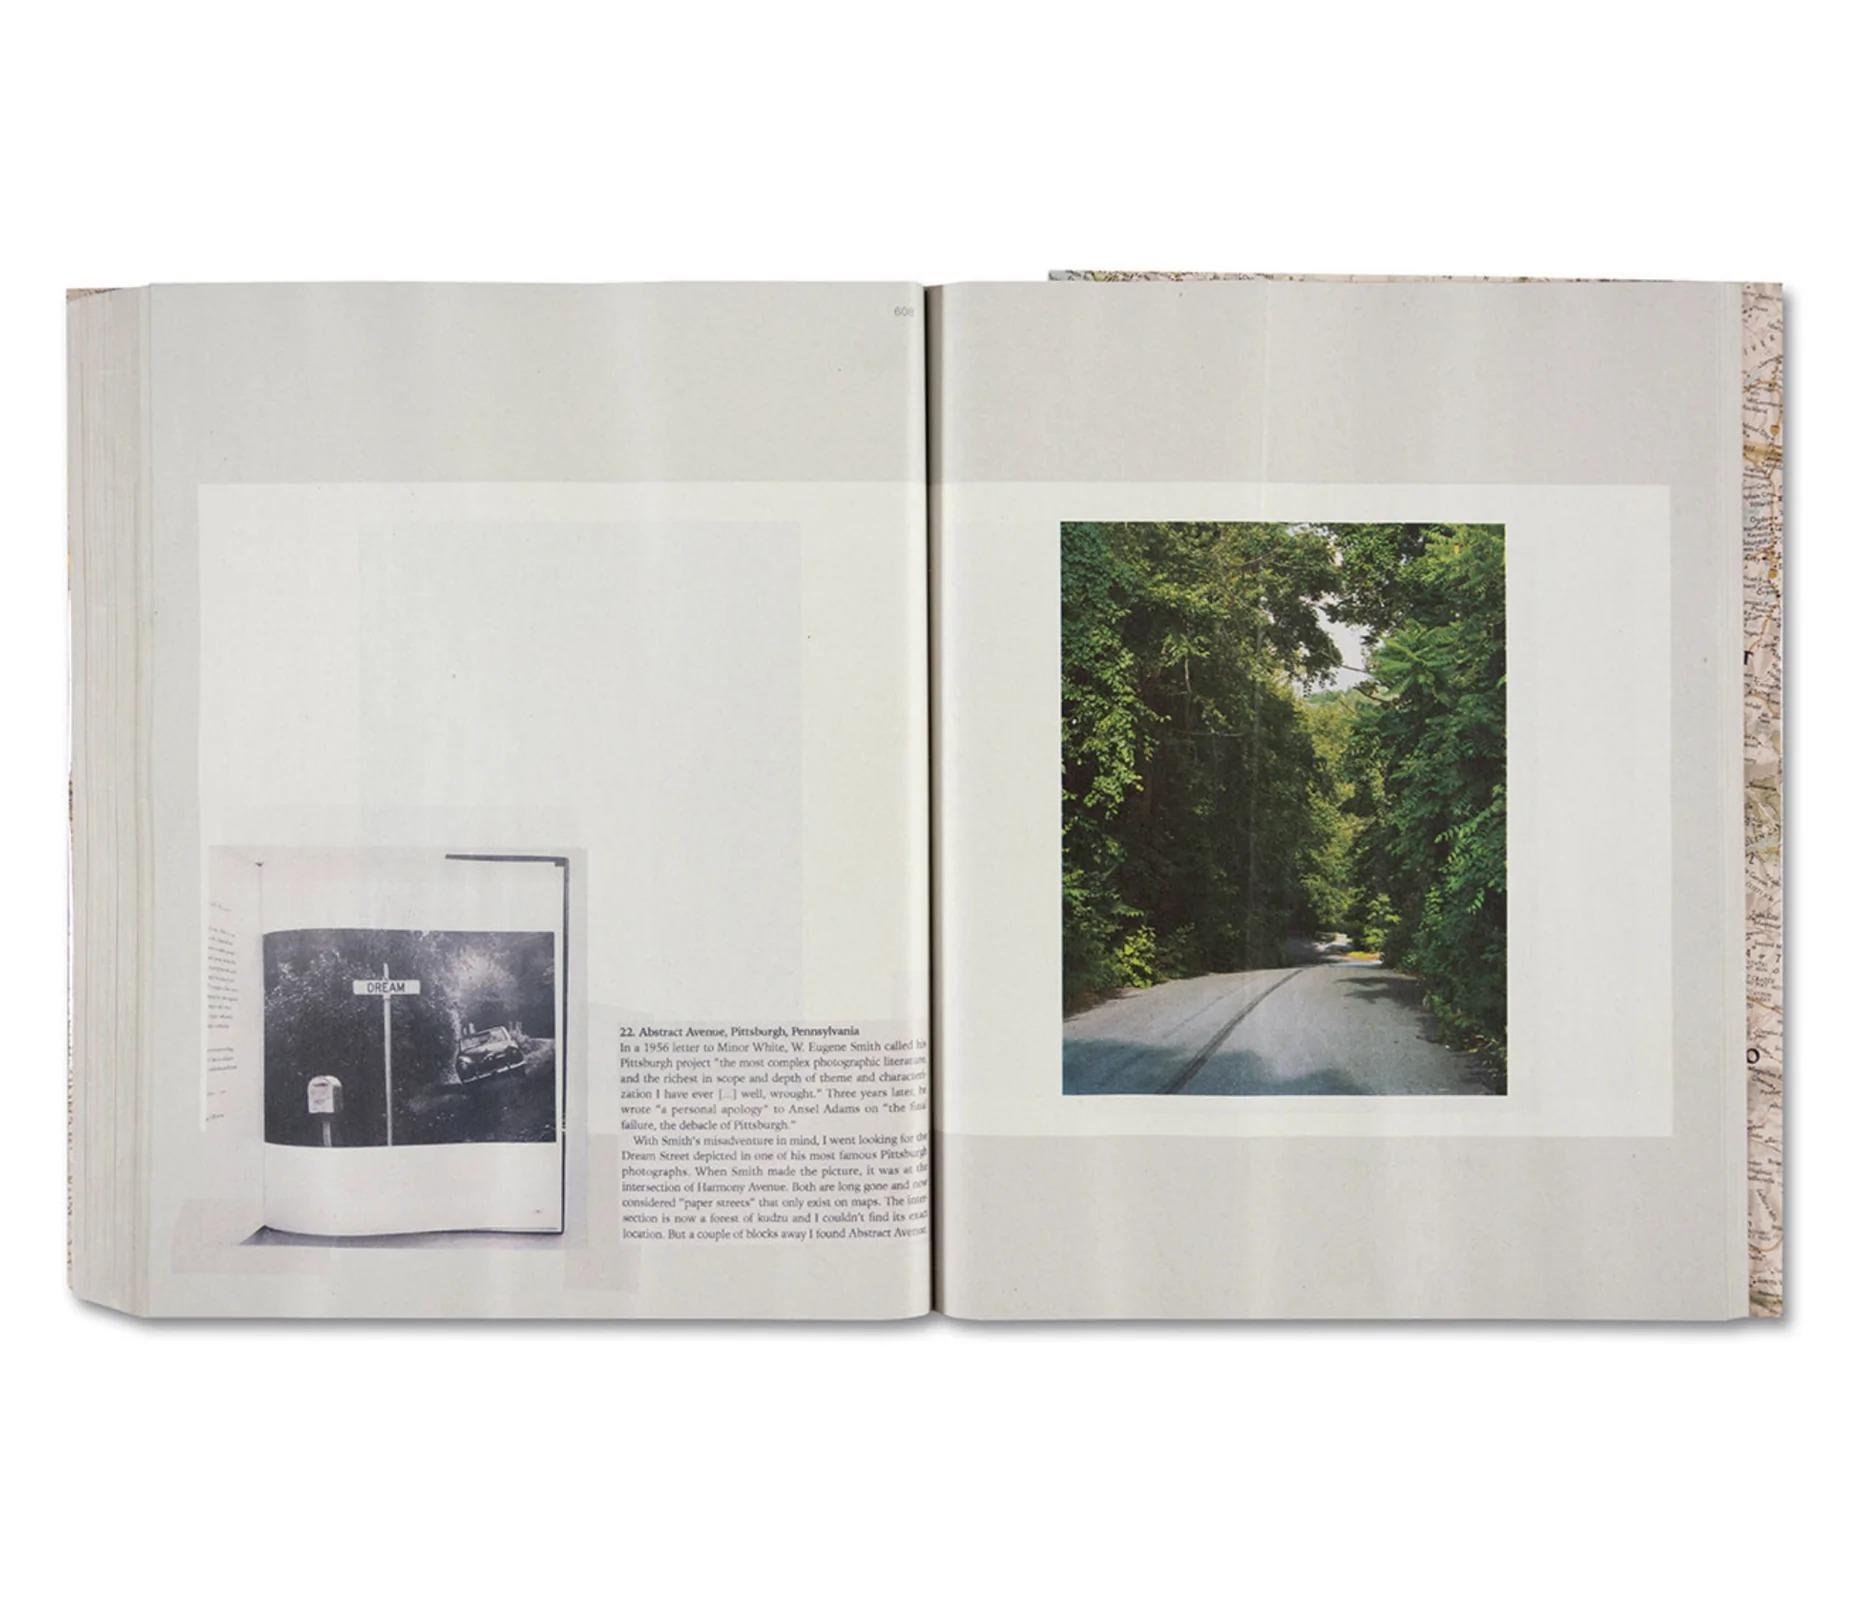 【JAPANESE EDITION / SIGNED/ポスター特典付き】GATHERED LEAVES ANNOTATED by Alec Soth アレック・ソス 作品集